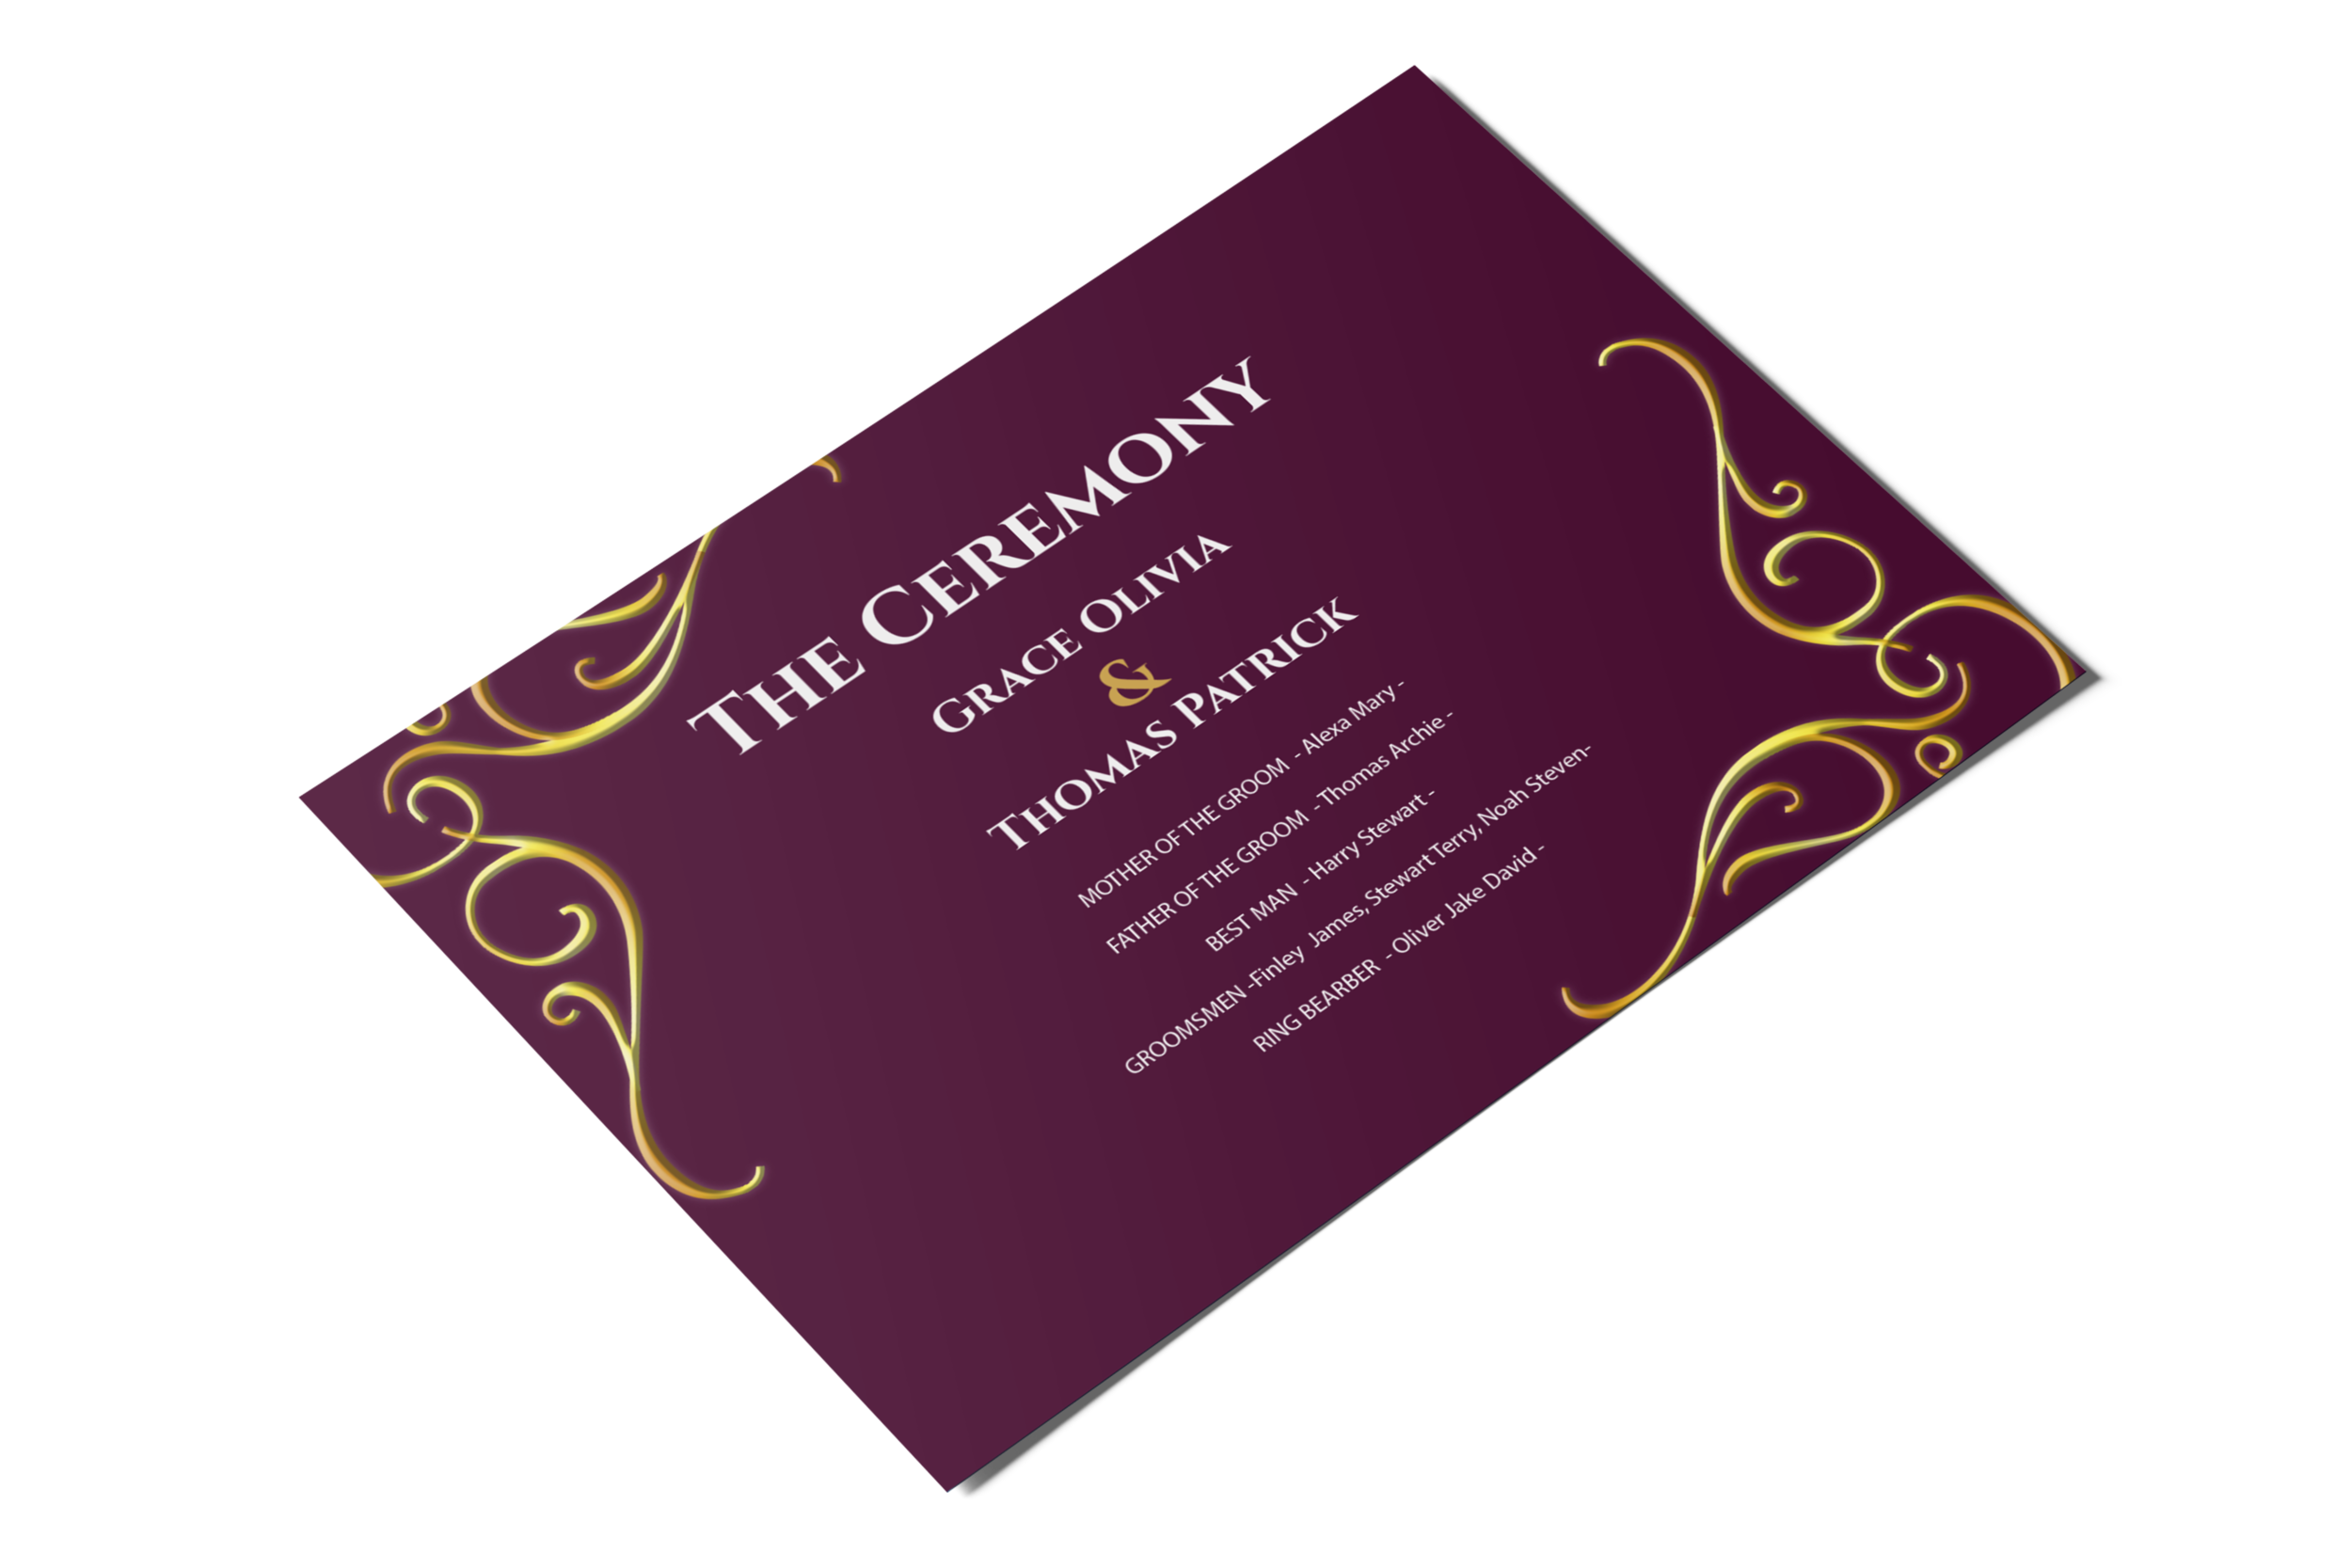 They are more than just postcards they are Ceremony Programs